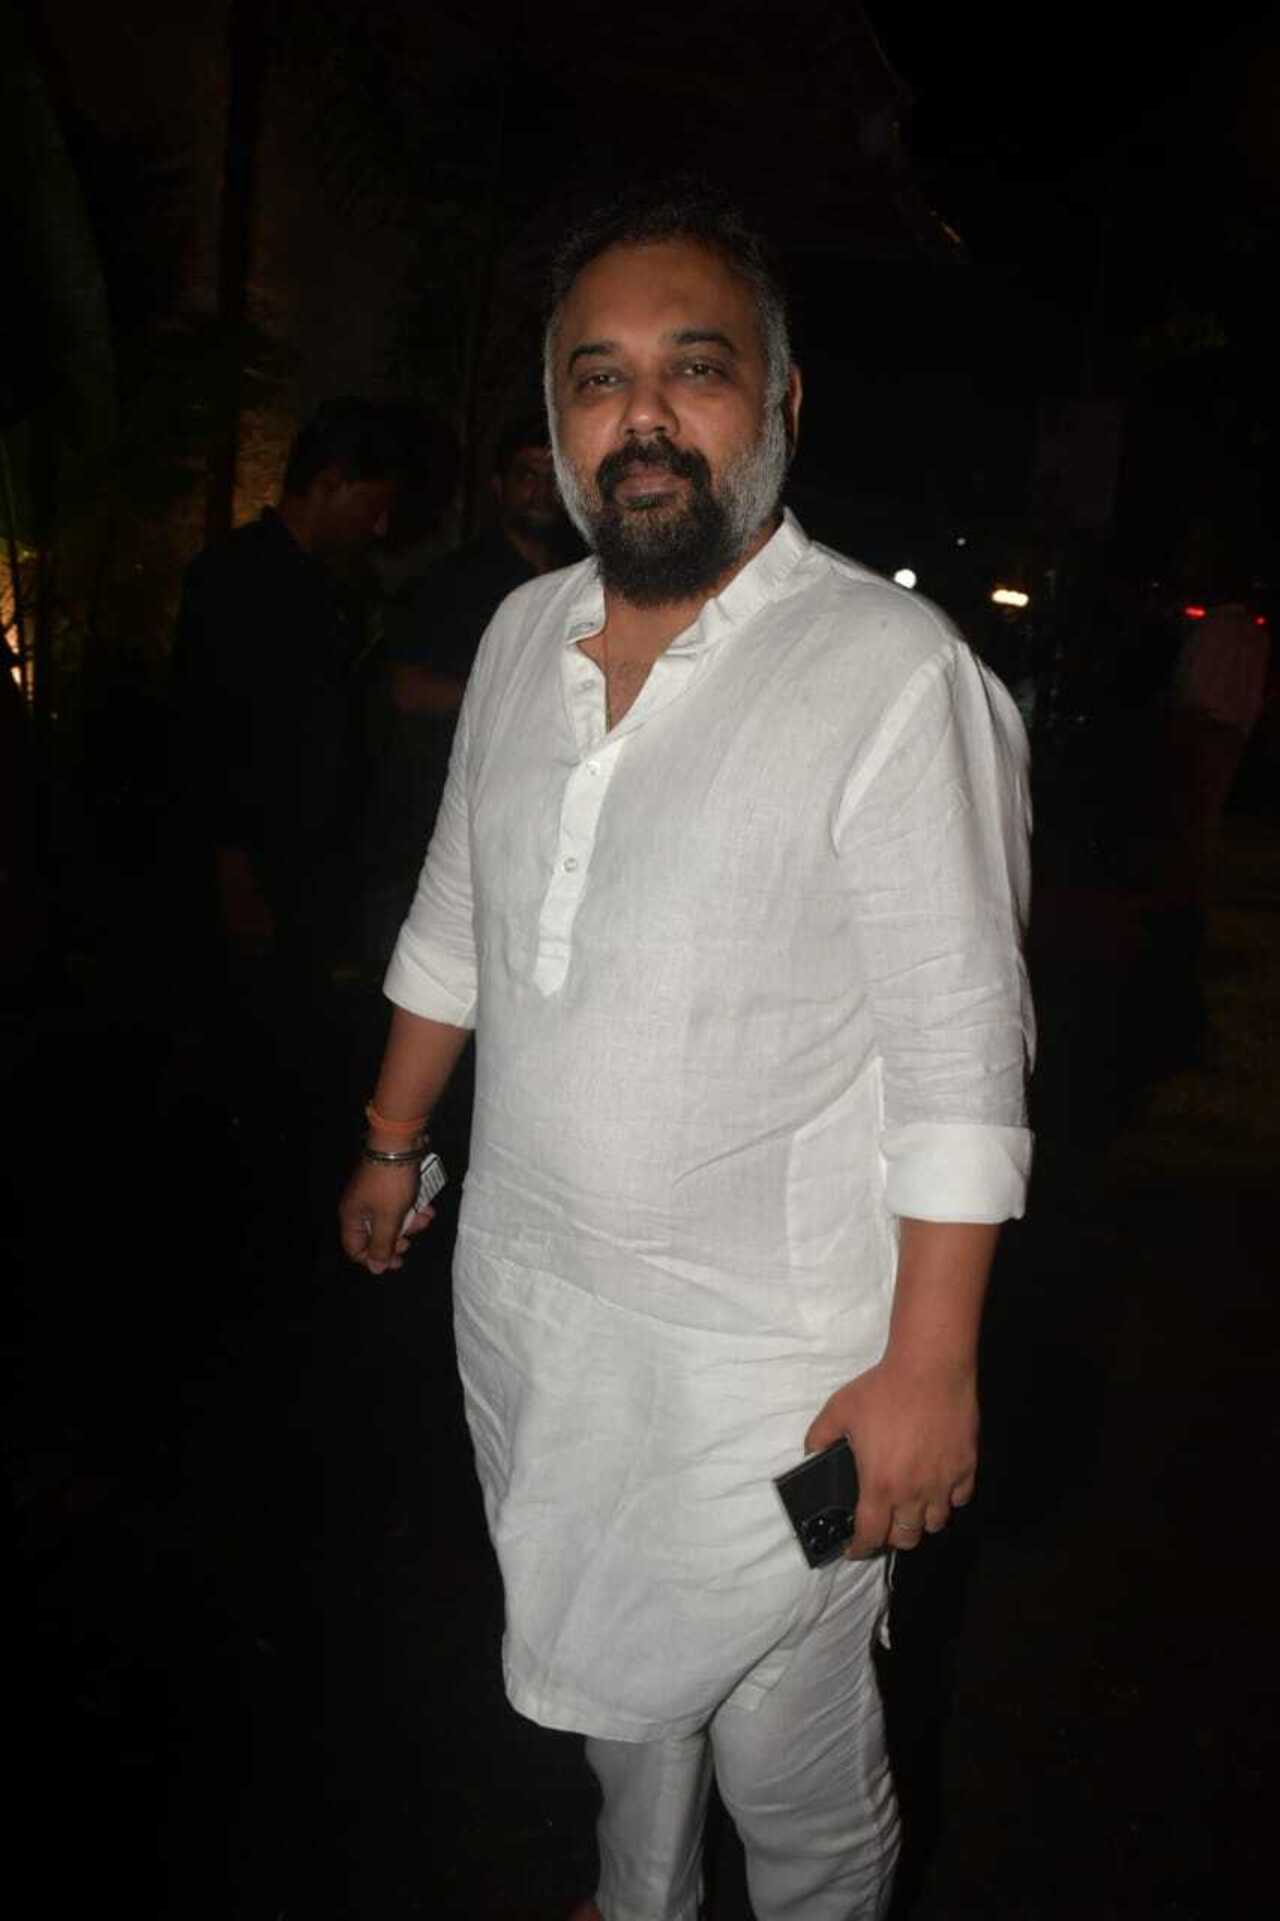 Ace director Luv Ranjan also marked his presence at Huma's star-studded birthday party